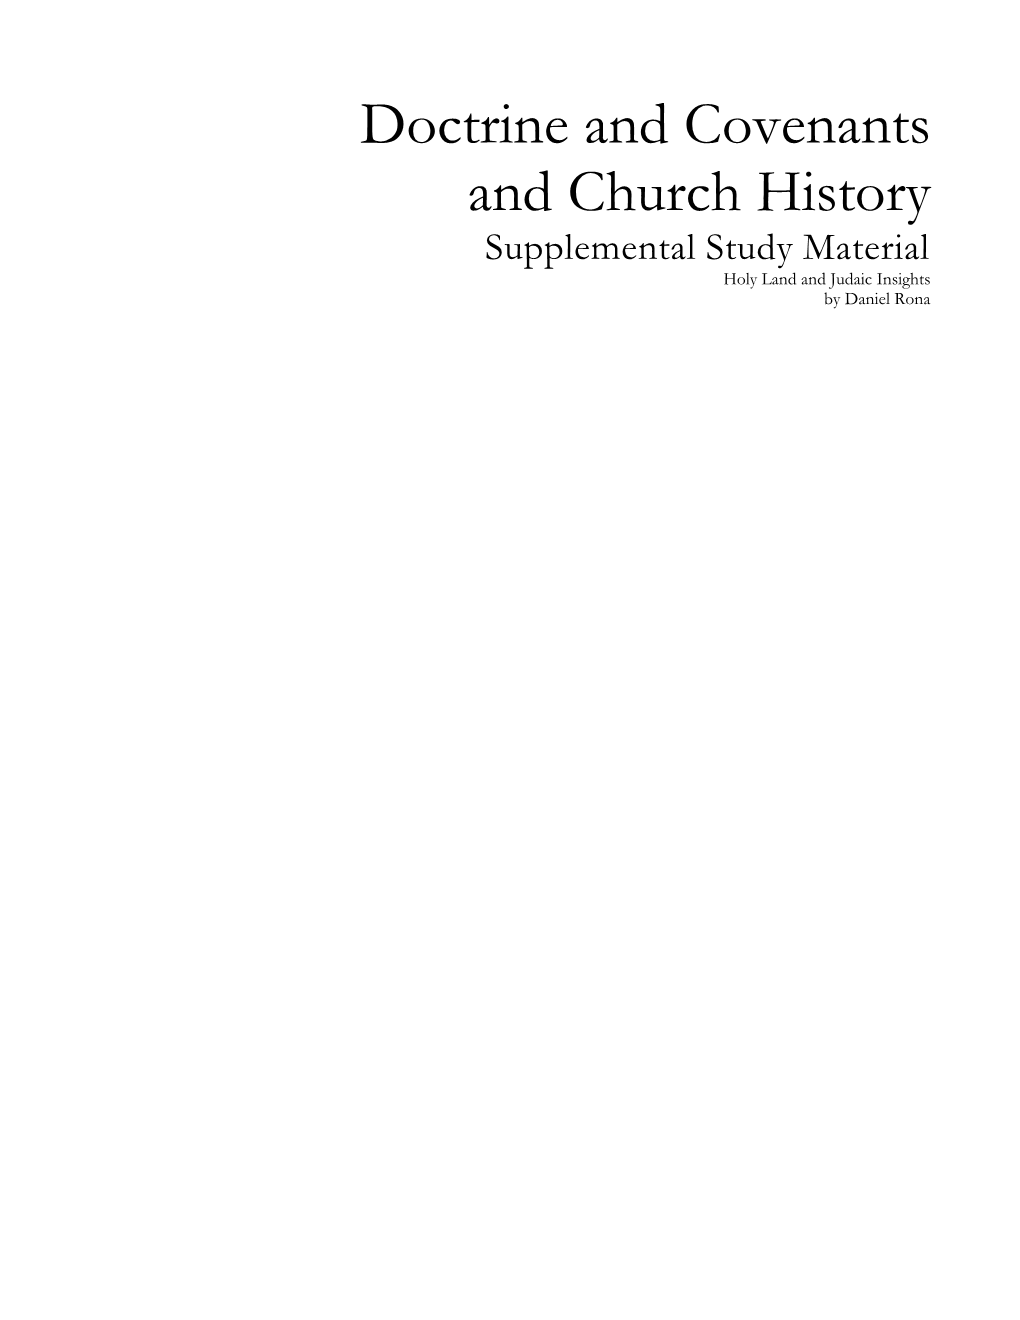 Doctrine and Covenants and Church History Supplemental Study Material Holy Land and Judaic Insights by Daniel Rona Copyright © 2004 by Daniel Rona